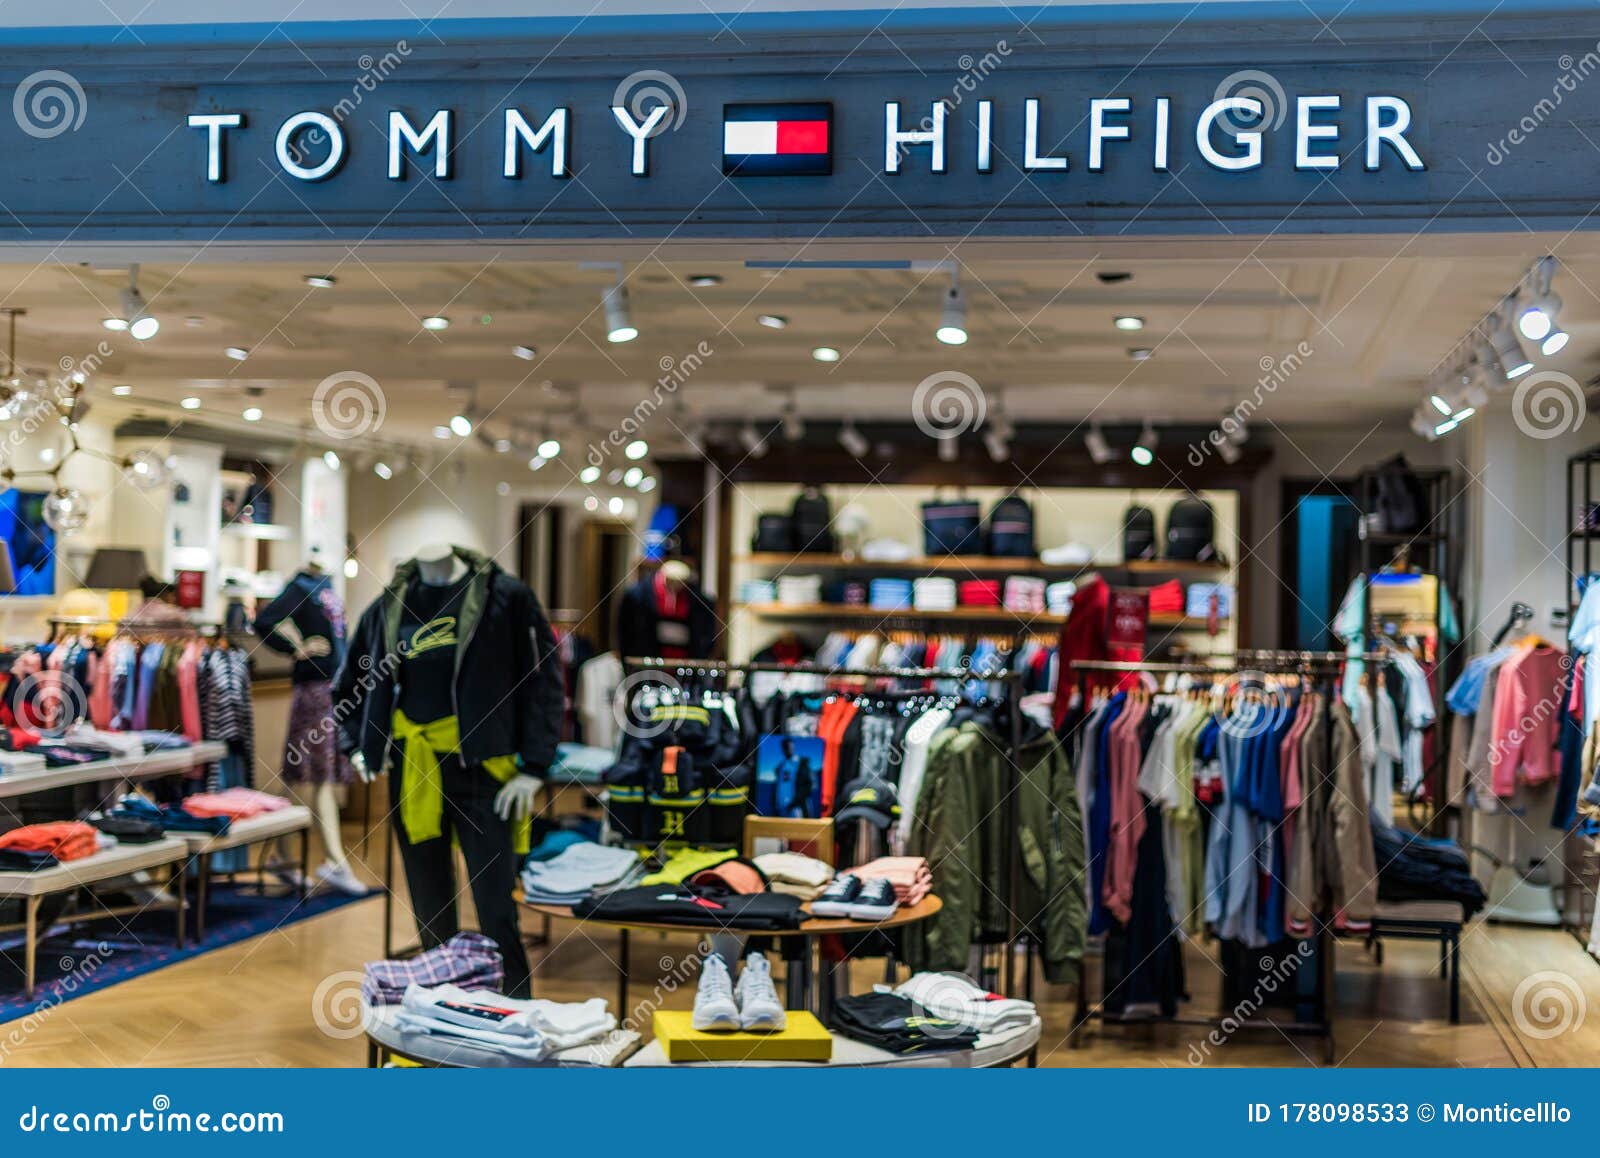 tommy hilfiger store close to me